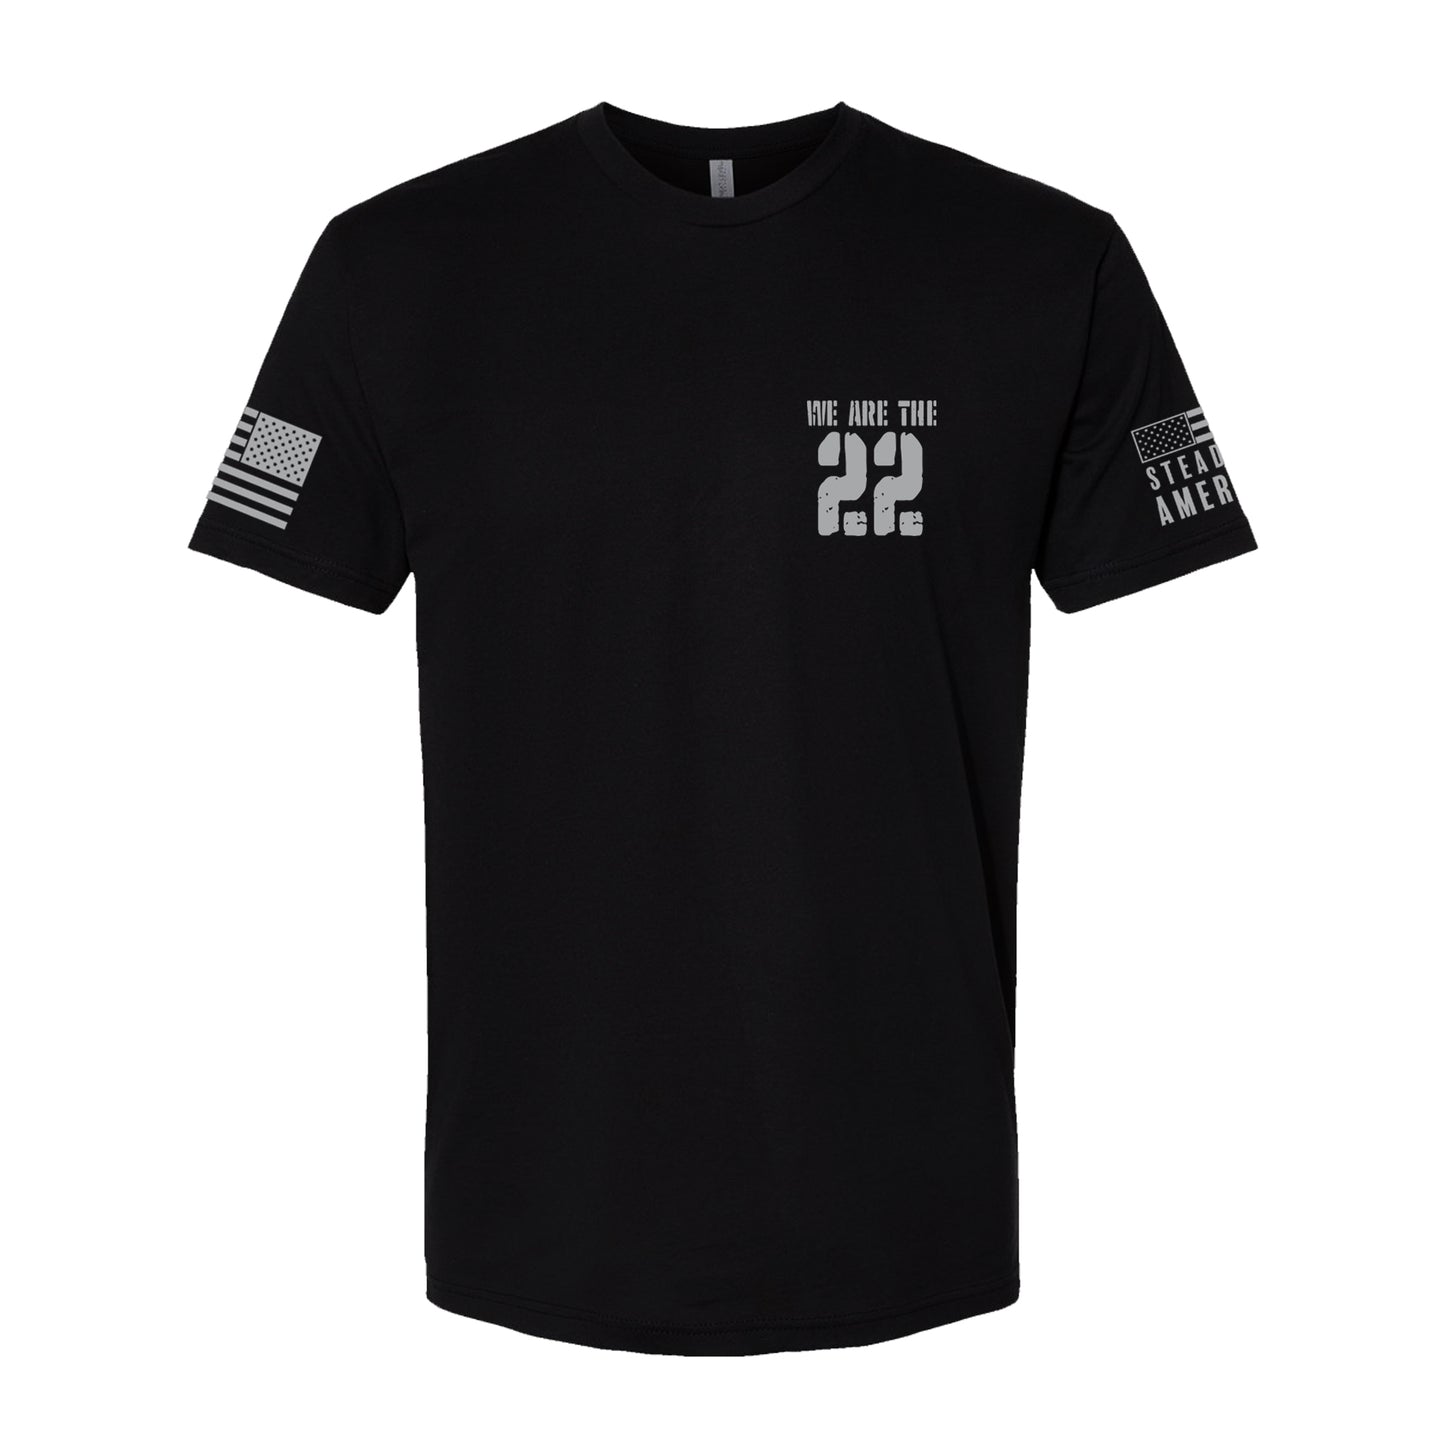 We Are The 22, Short Sleeve, Black